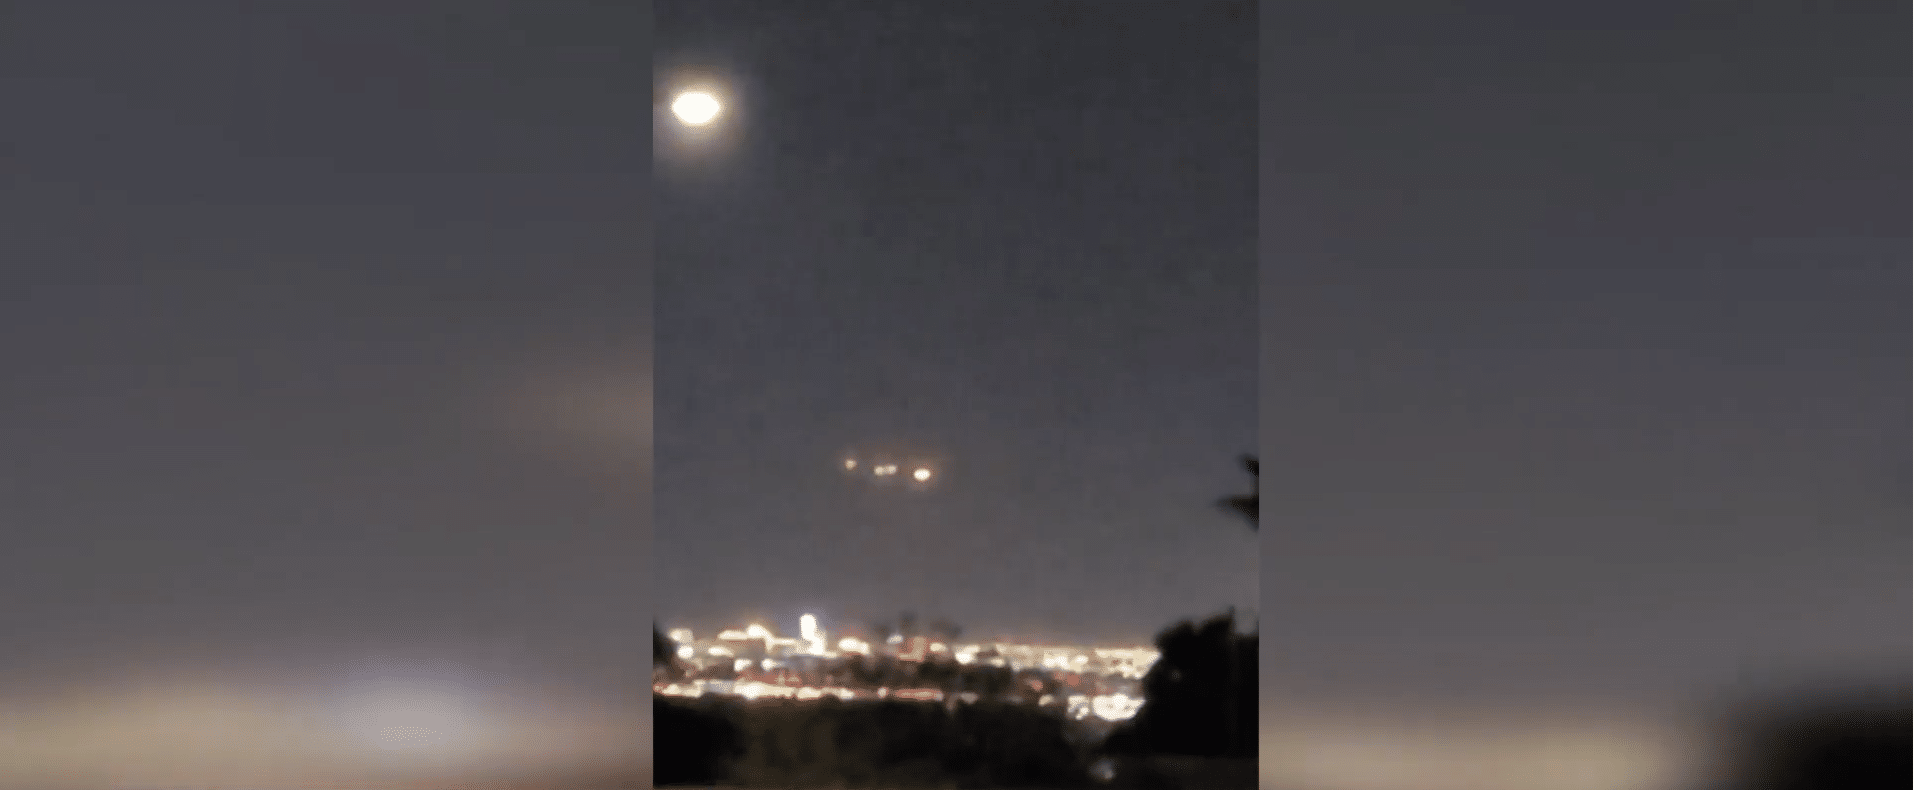 (WATCH) ‘Mysterious Lights’ seen hovering over night sky of Las Vegas valley